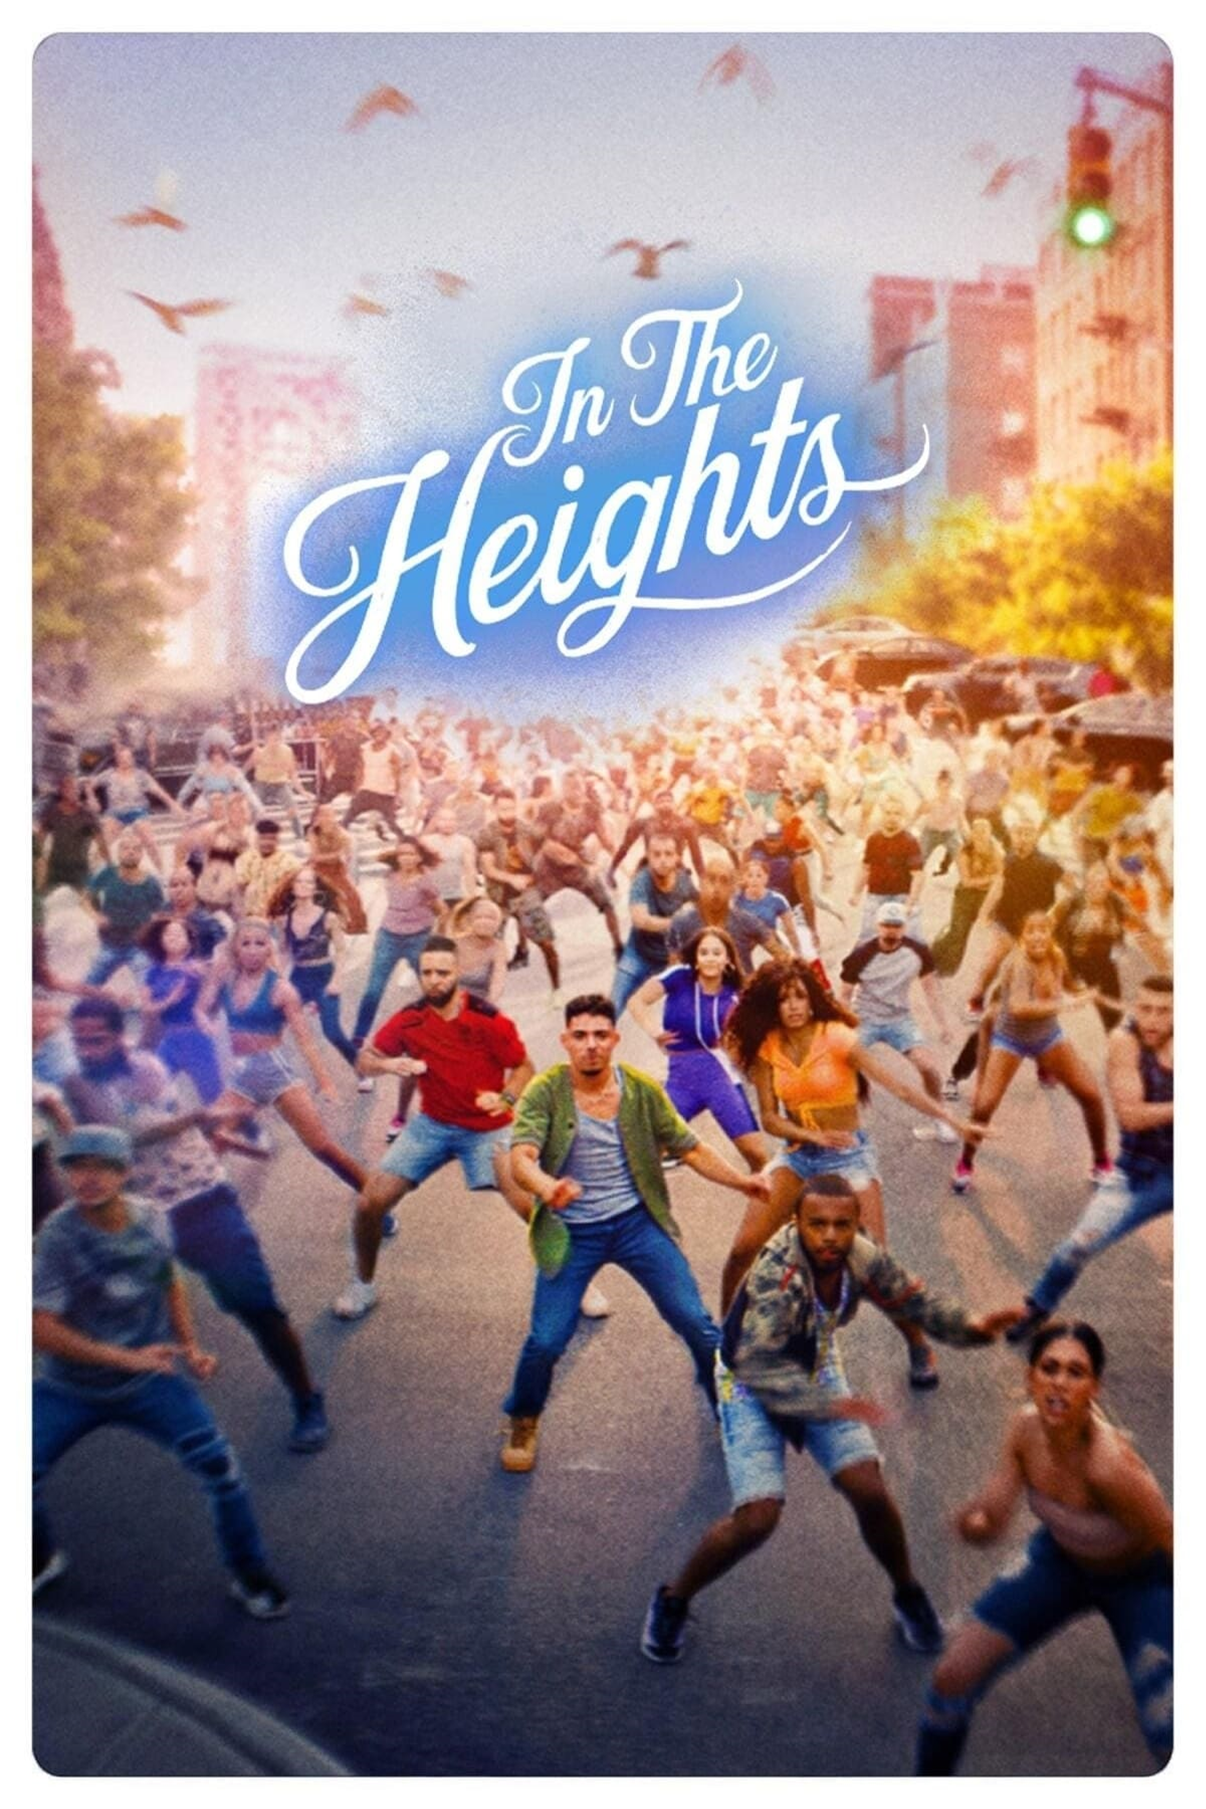 In the Heights movie poster, featuring various cast members dancing and the title of the movie across the top.